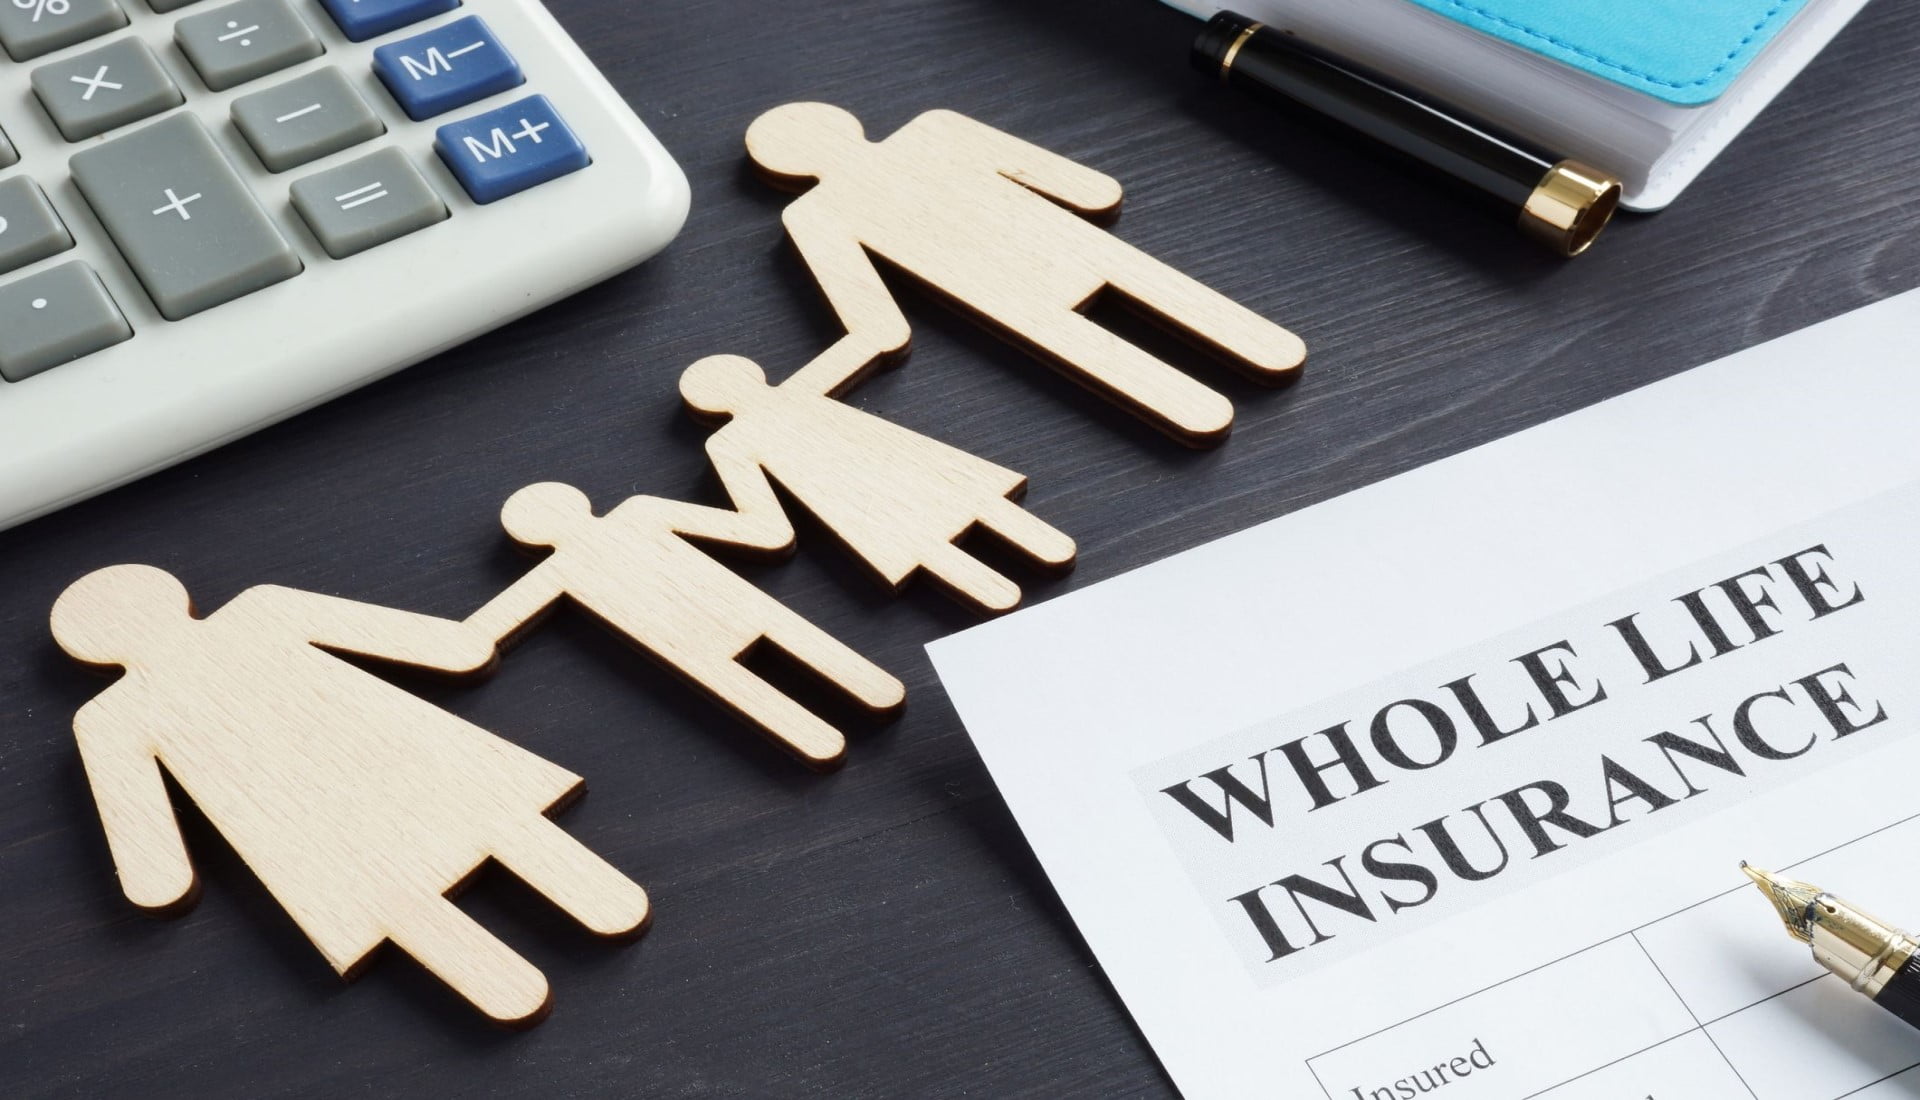 Which is the best whole of life insurance?